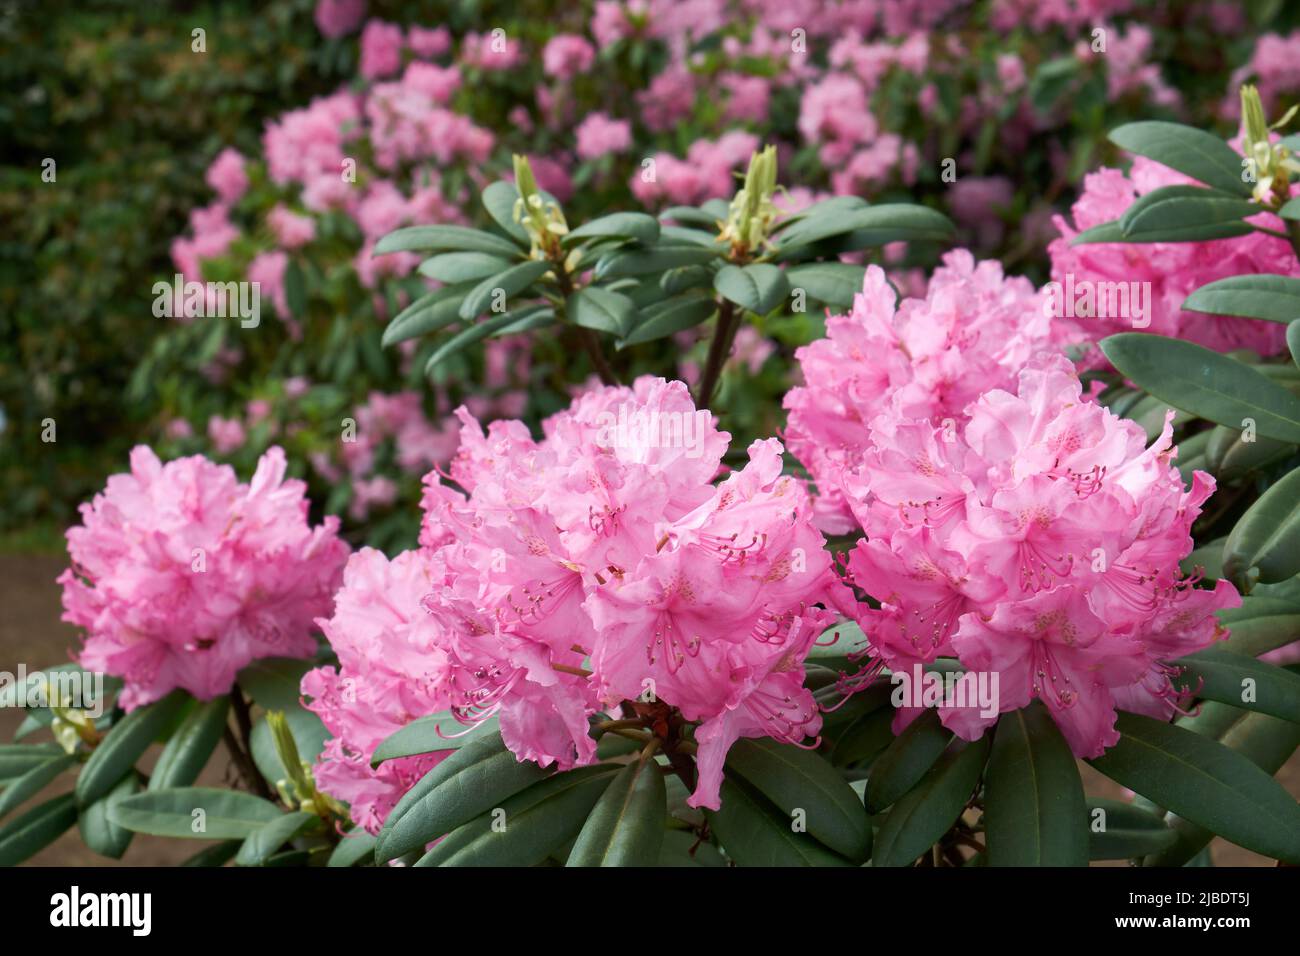 Beautiful Rhododendron flowers close up, lushly blooming Rhododendrons on background. Varieties of hybrid Rhododendron bushes in summer garden. Stock Photo